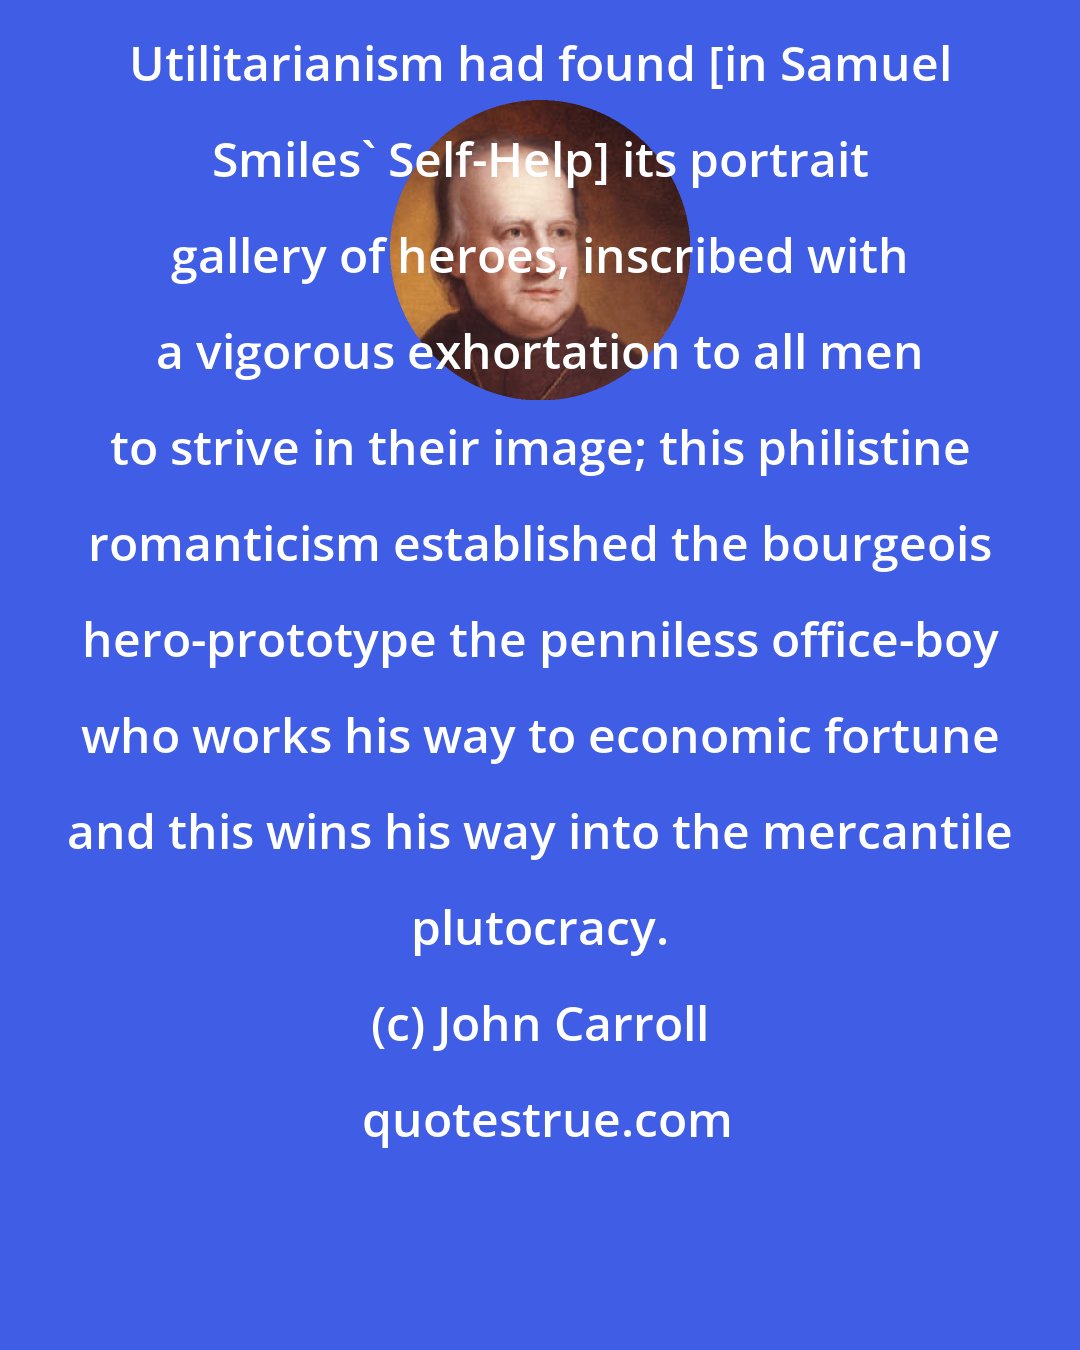 John Carroll: Utilitarianism had found [in Samuel Smiles' Self-Help] its portrait gallery of heroes, inscribed with a vigorous exhortation to all men to strive in their image; this philistine romanticism established the bourgeois hero-prototype the penniless office-boy who works his way to economic fortune and this wins his way into the mercantile plutocracy.